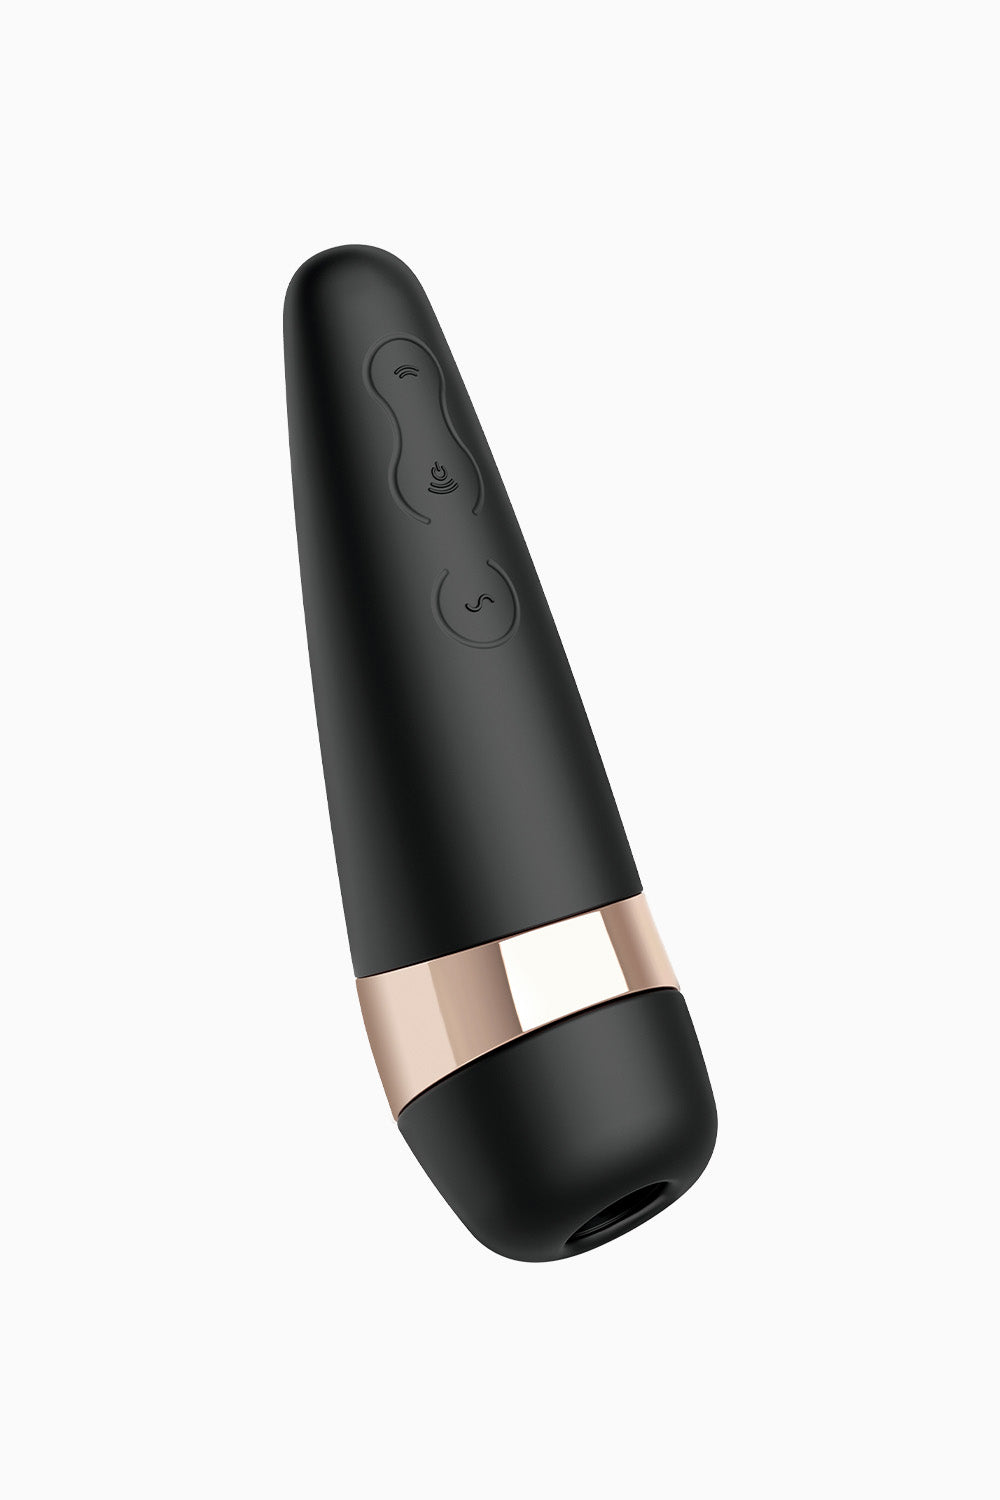 Satisfyer Vibration Pro 3+ Air Simulator, 5.5 Inches